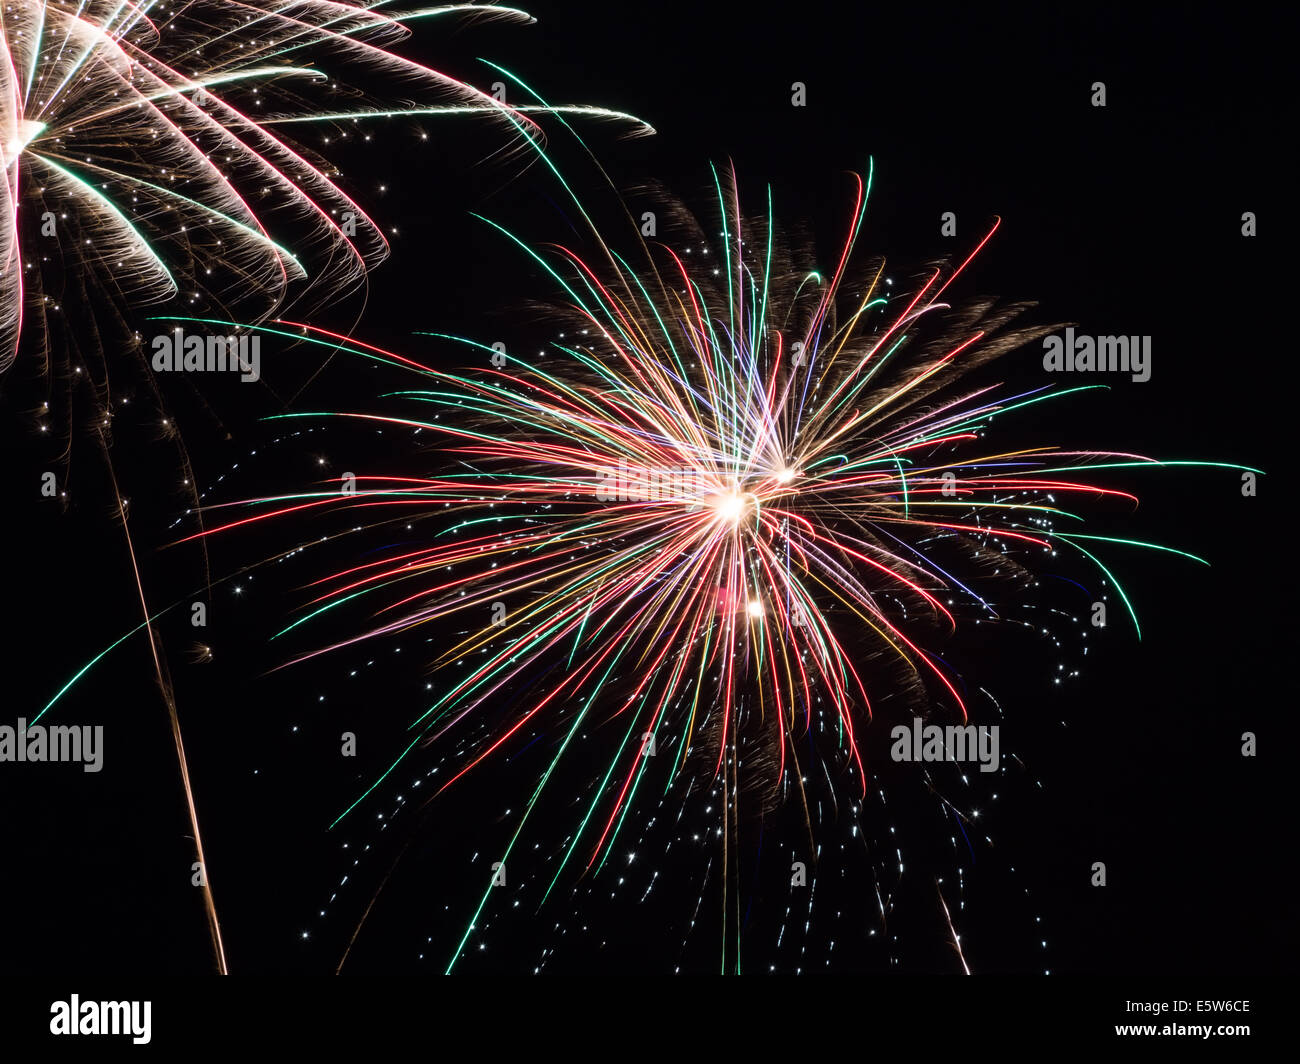 Beautiful multi-colored fireworks exploding in the night sky. Stock Photo